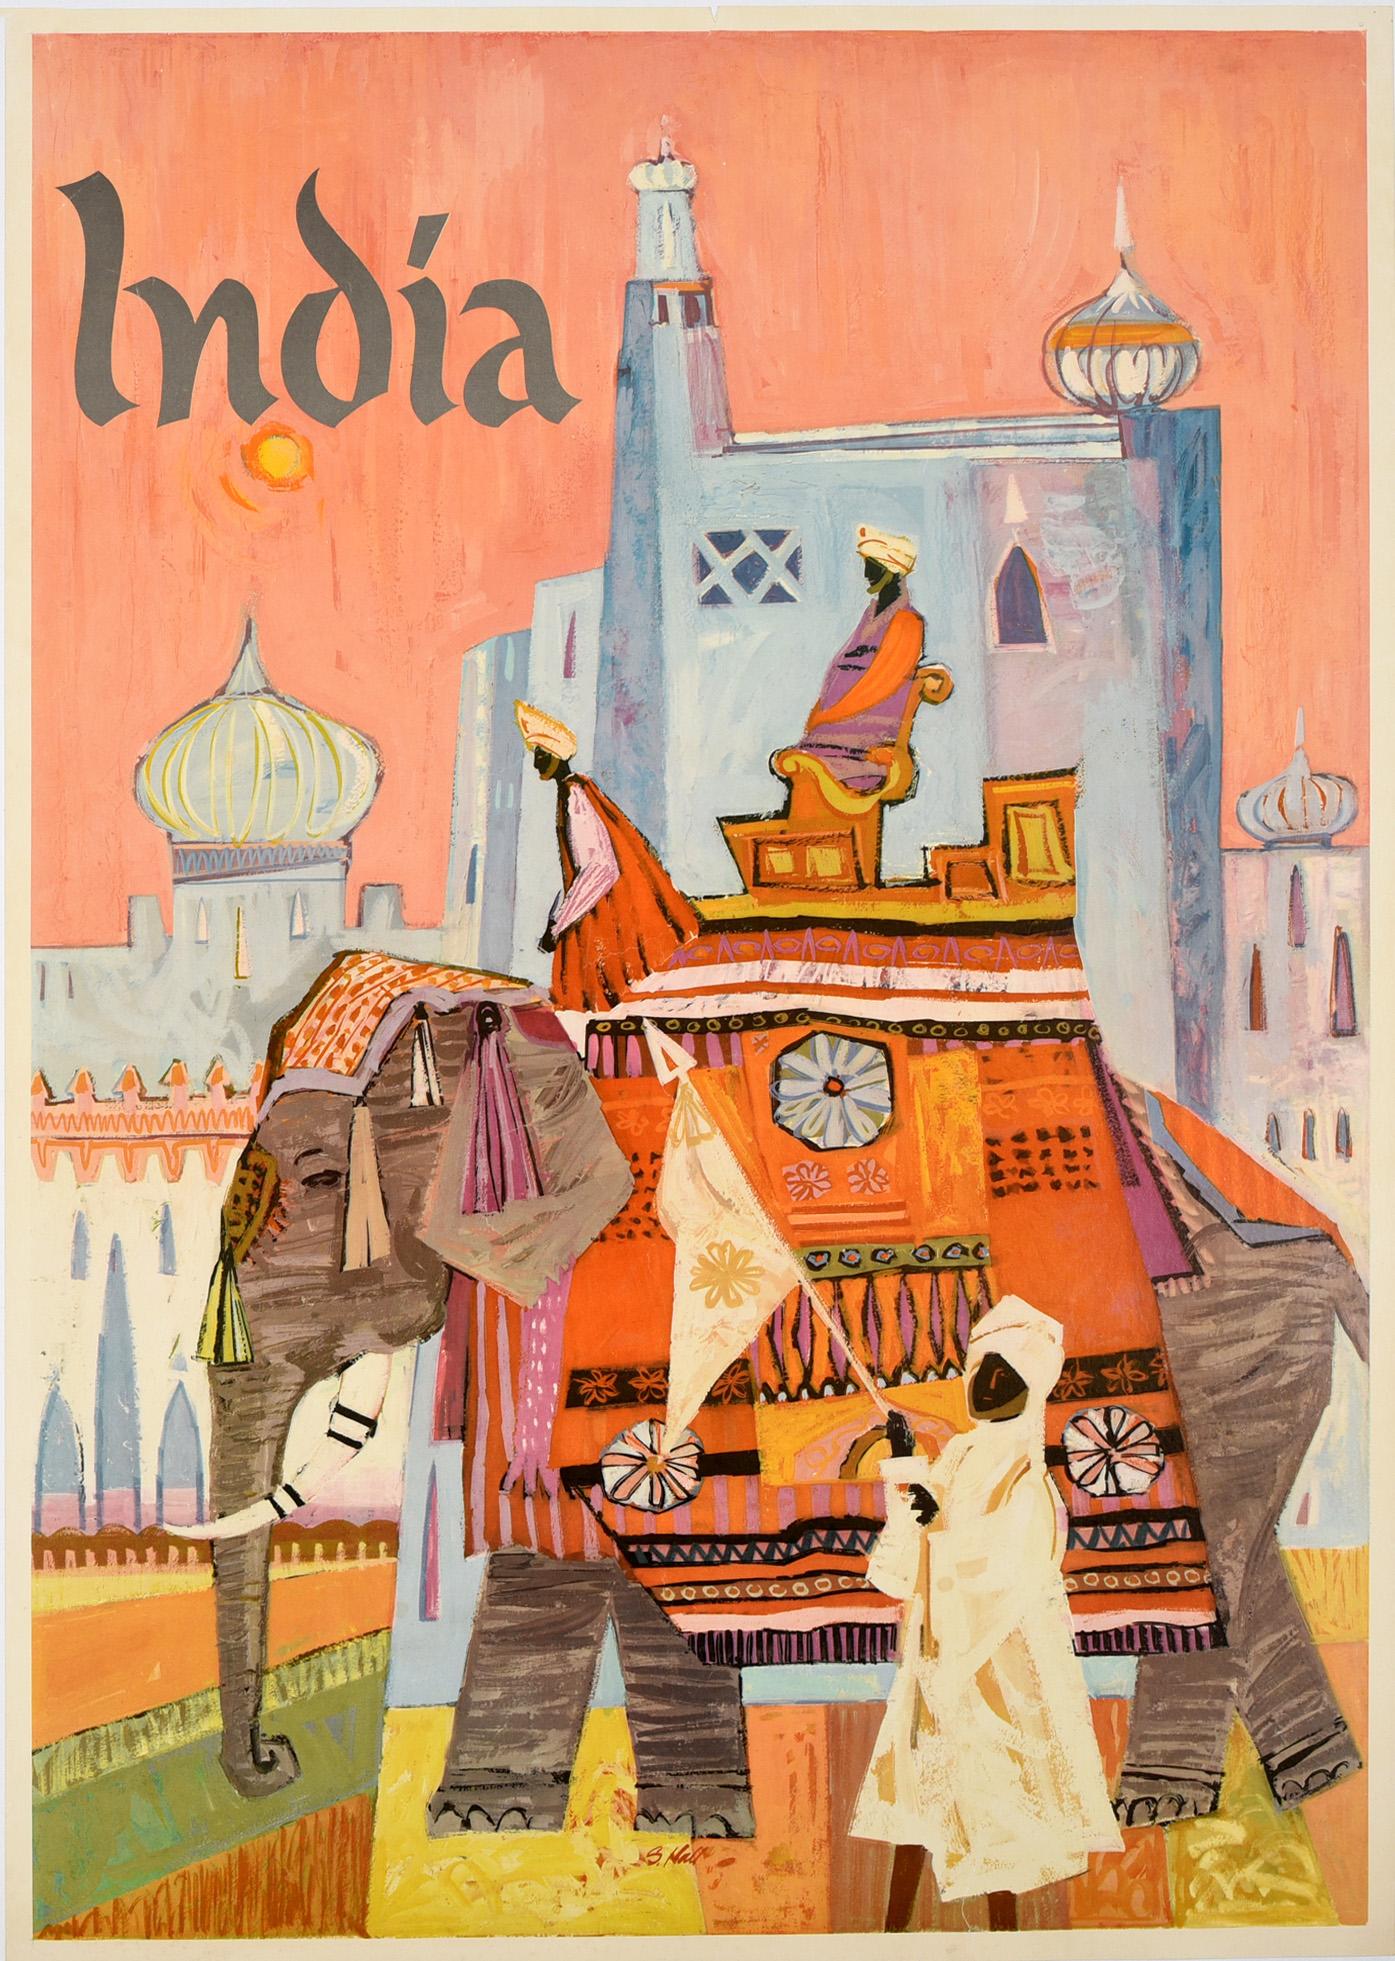 S Hall Print - Original Vintage Travel Poster For India Feat. Colourful Regal Elephant Howdah